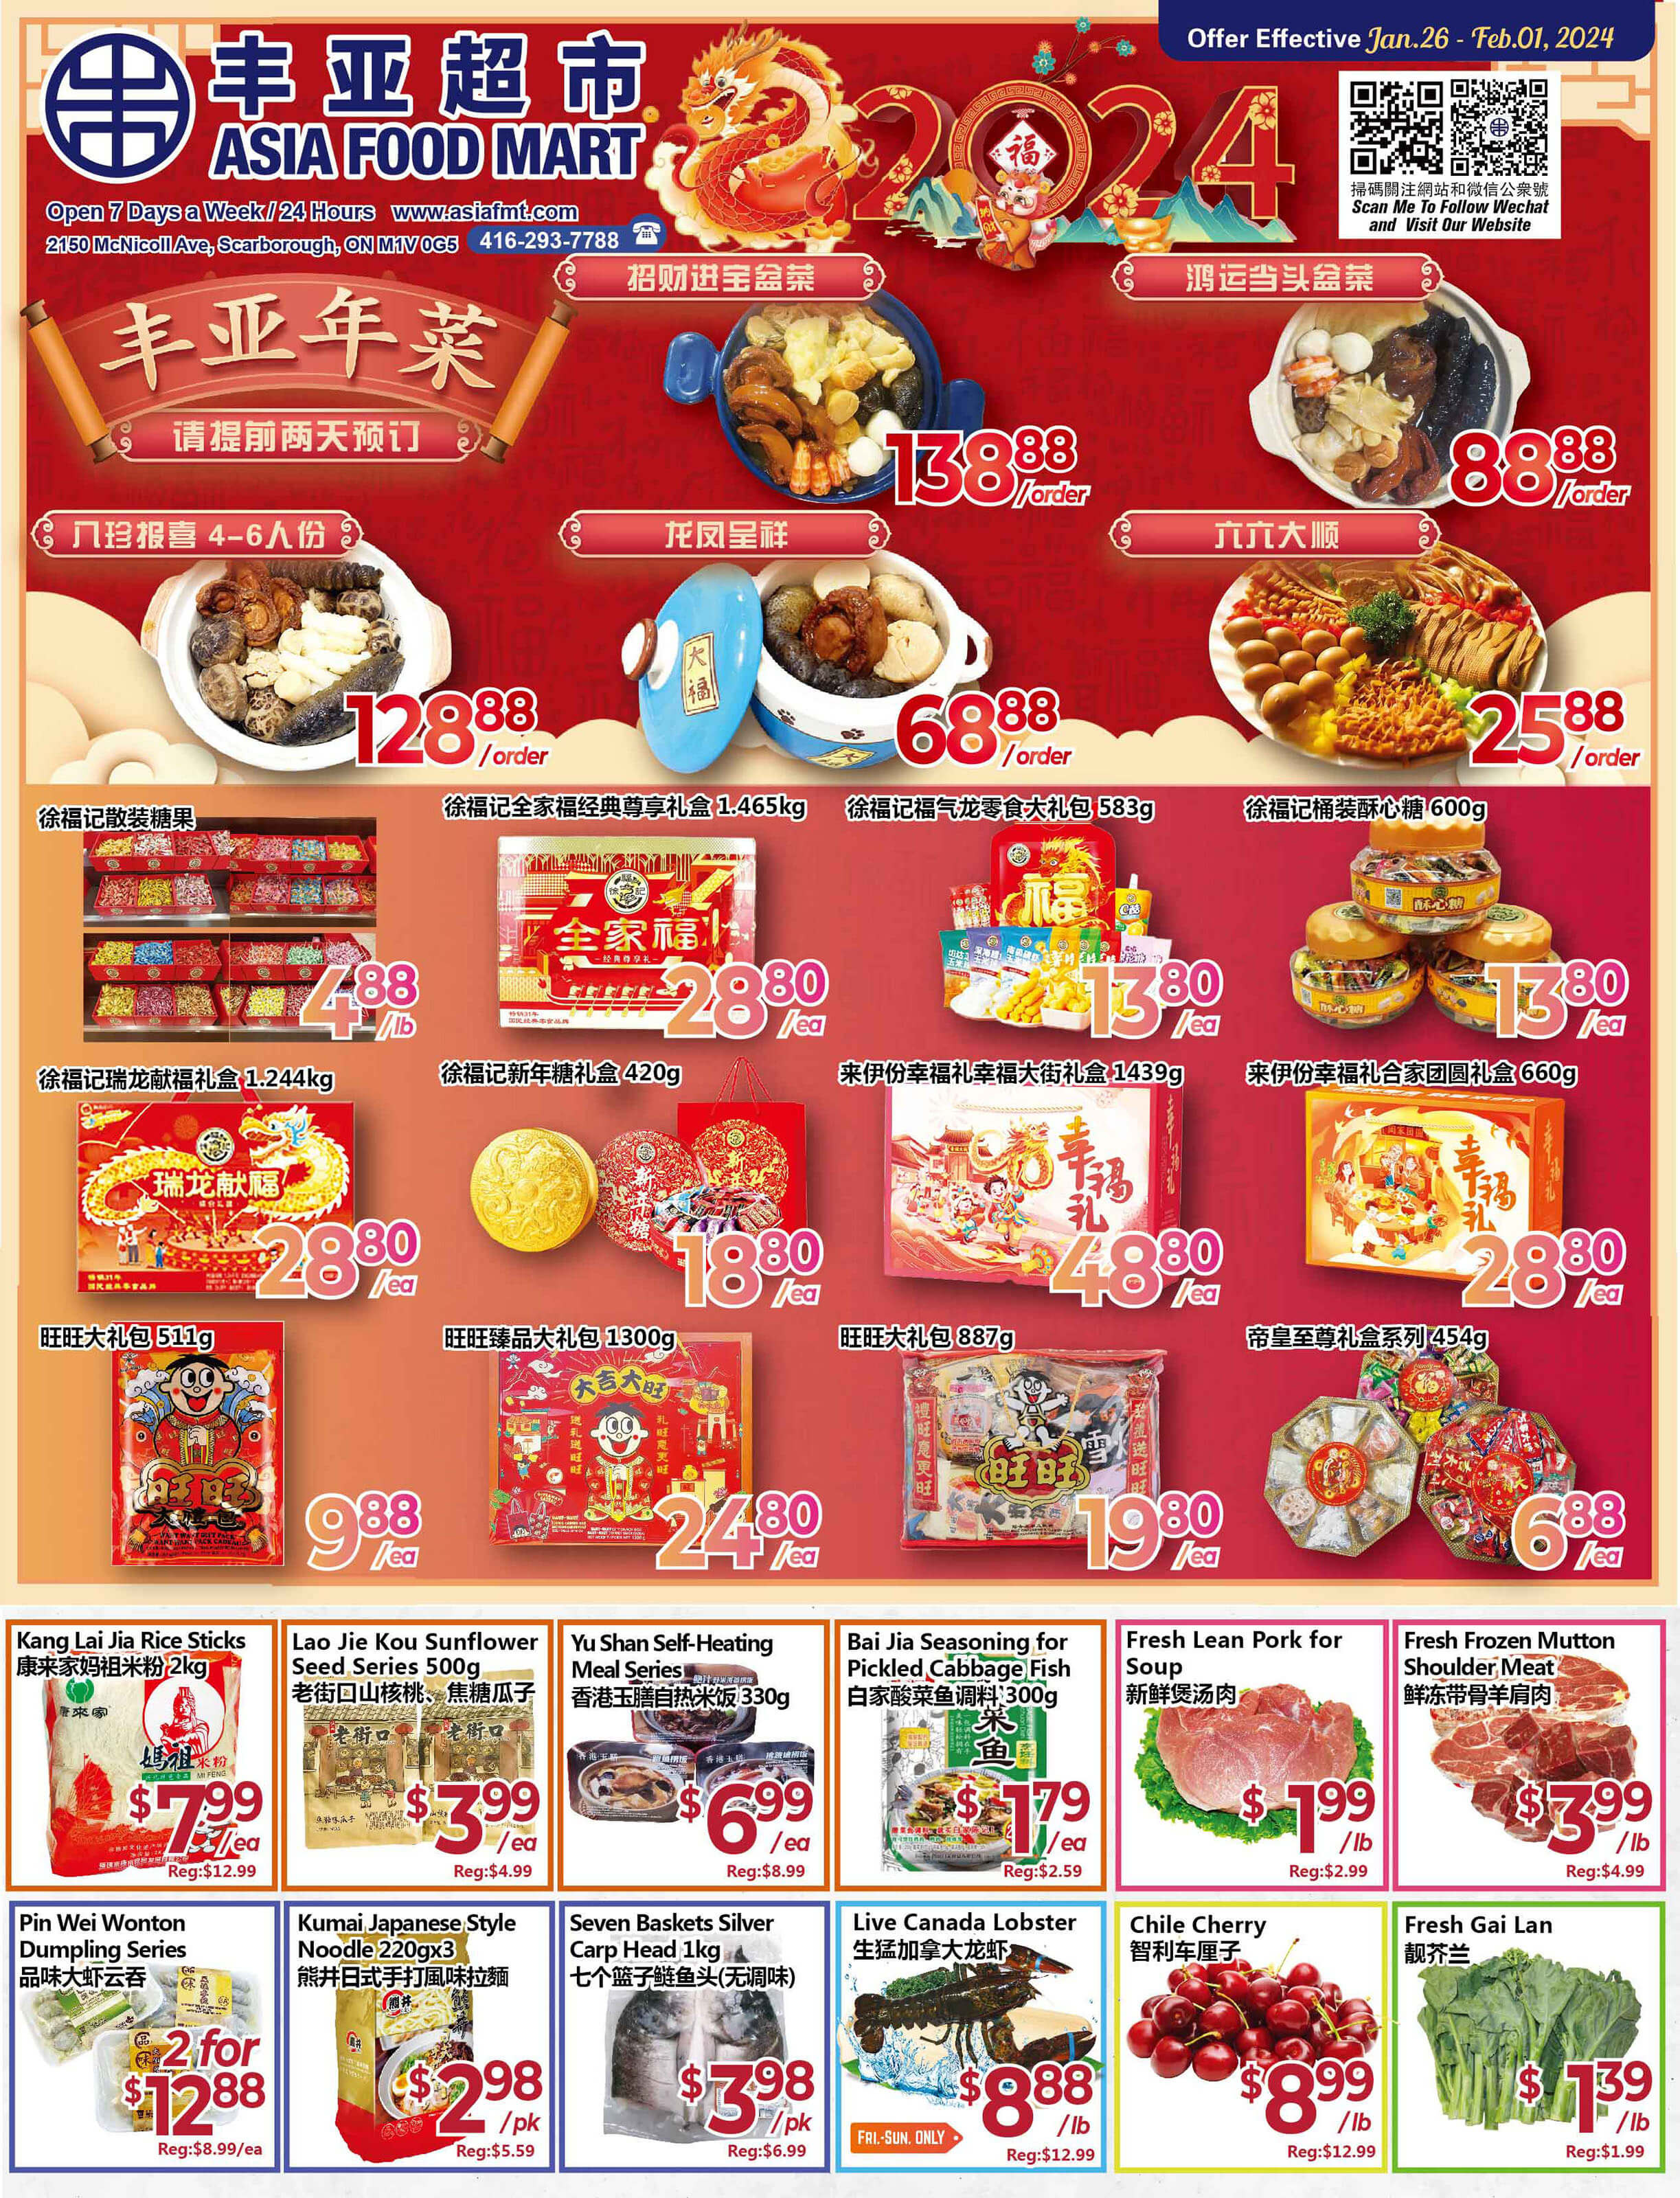 Asia Food Mart Flyer, January 26, 2024 to February 1, 2024, Page 1